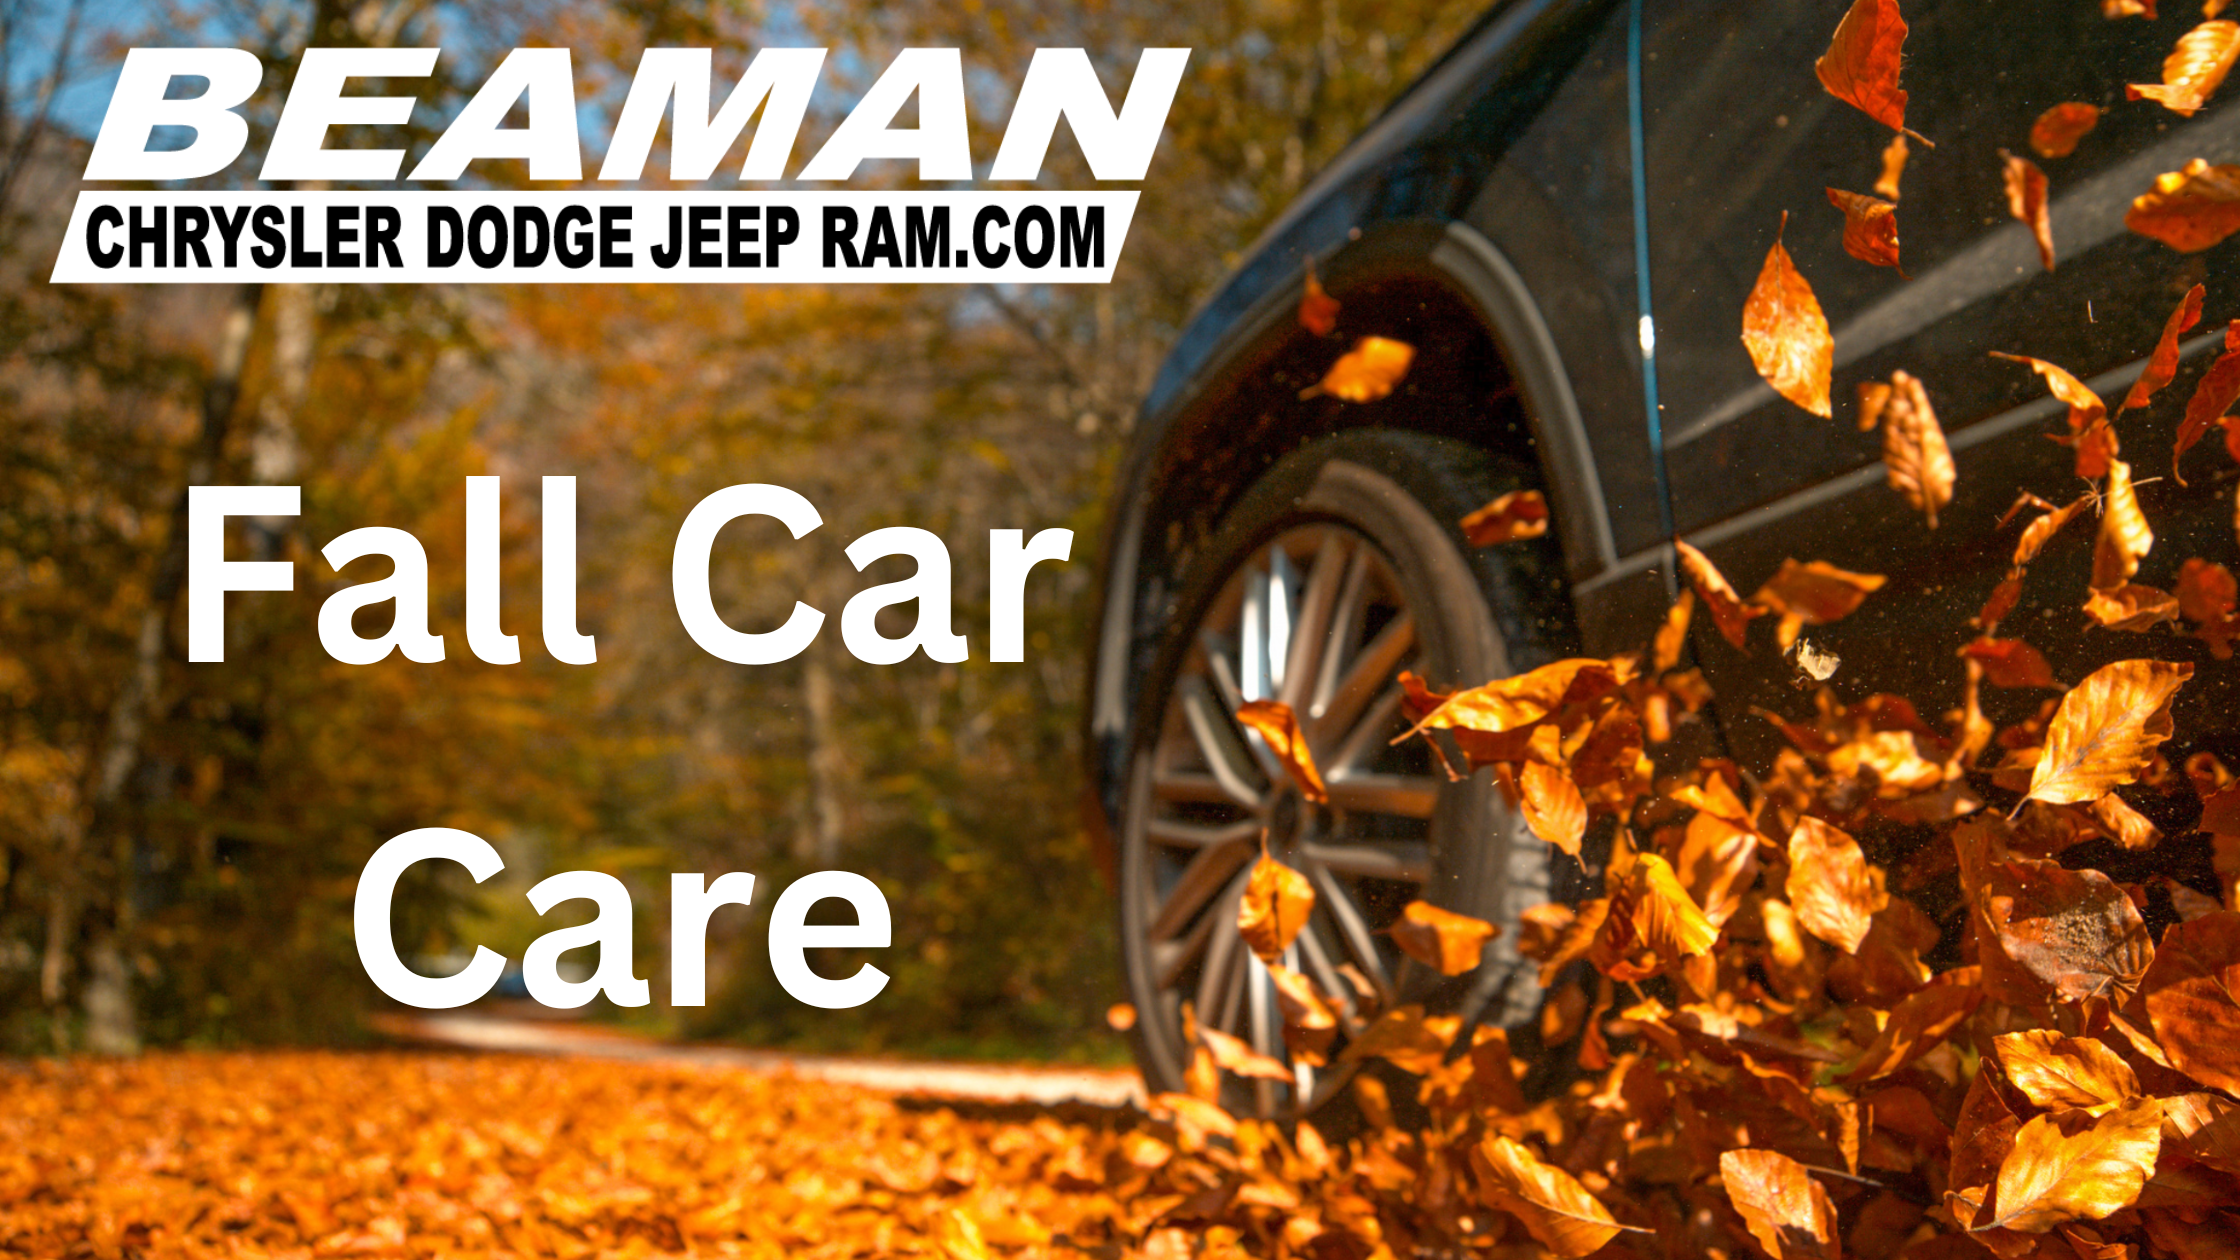 Fall Car Care Month